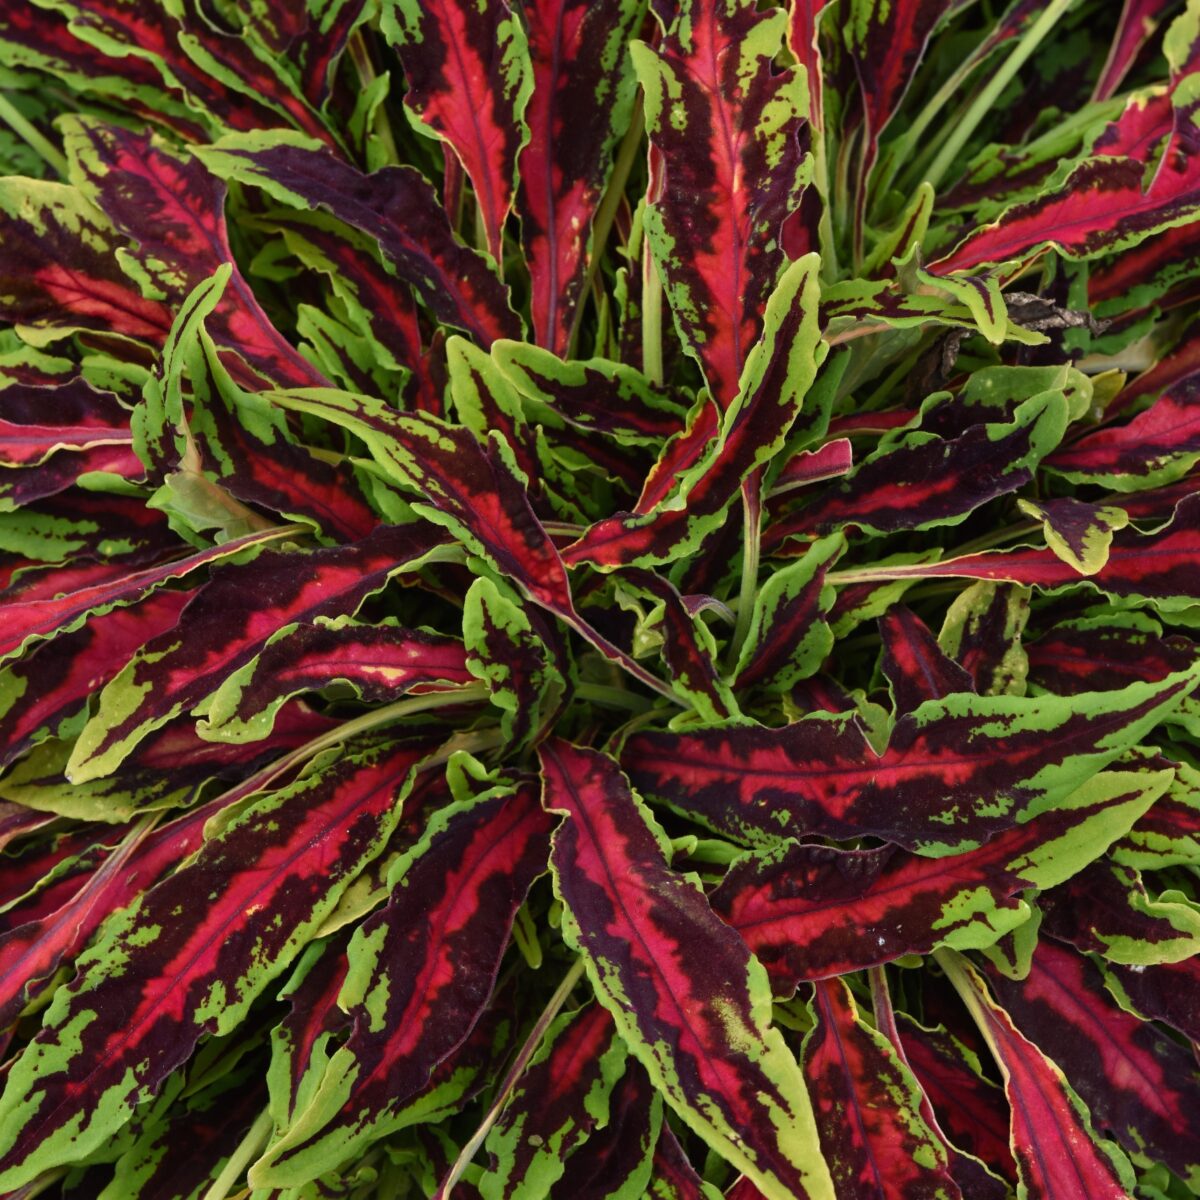 Bright Spitfire Coleus leaves showcasing hot-pink centers, rich burgundy splashes, and cool lime-green tips